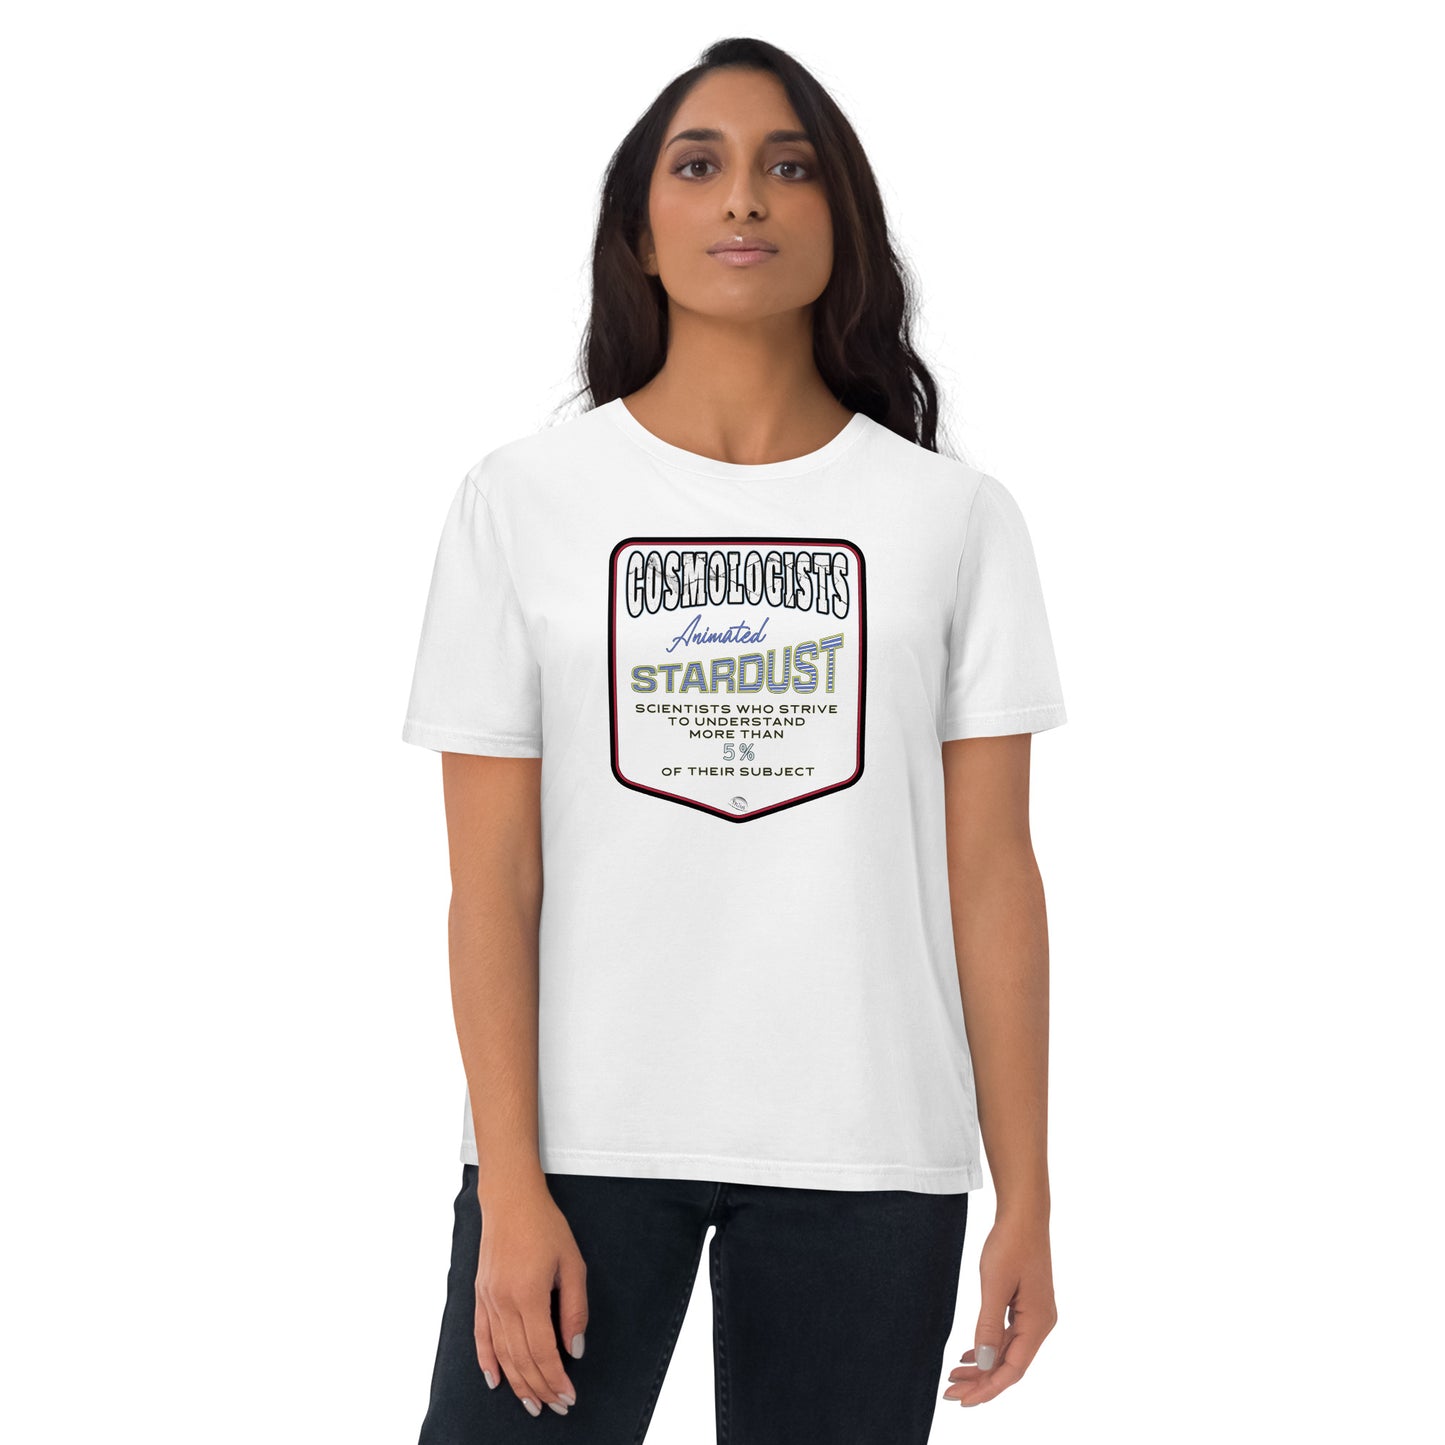 Unisex organic cotton t-shirt, Cosmologists, Animated Stardust Scientists Striving to Understand More Than 5% of their Subject